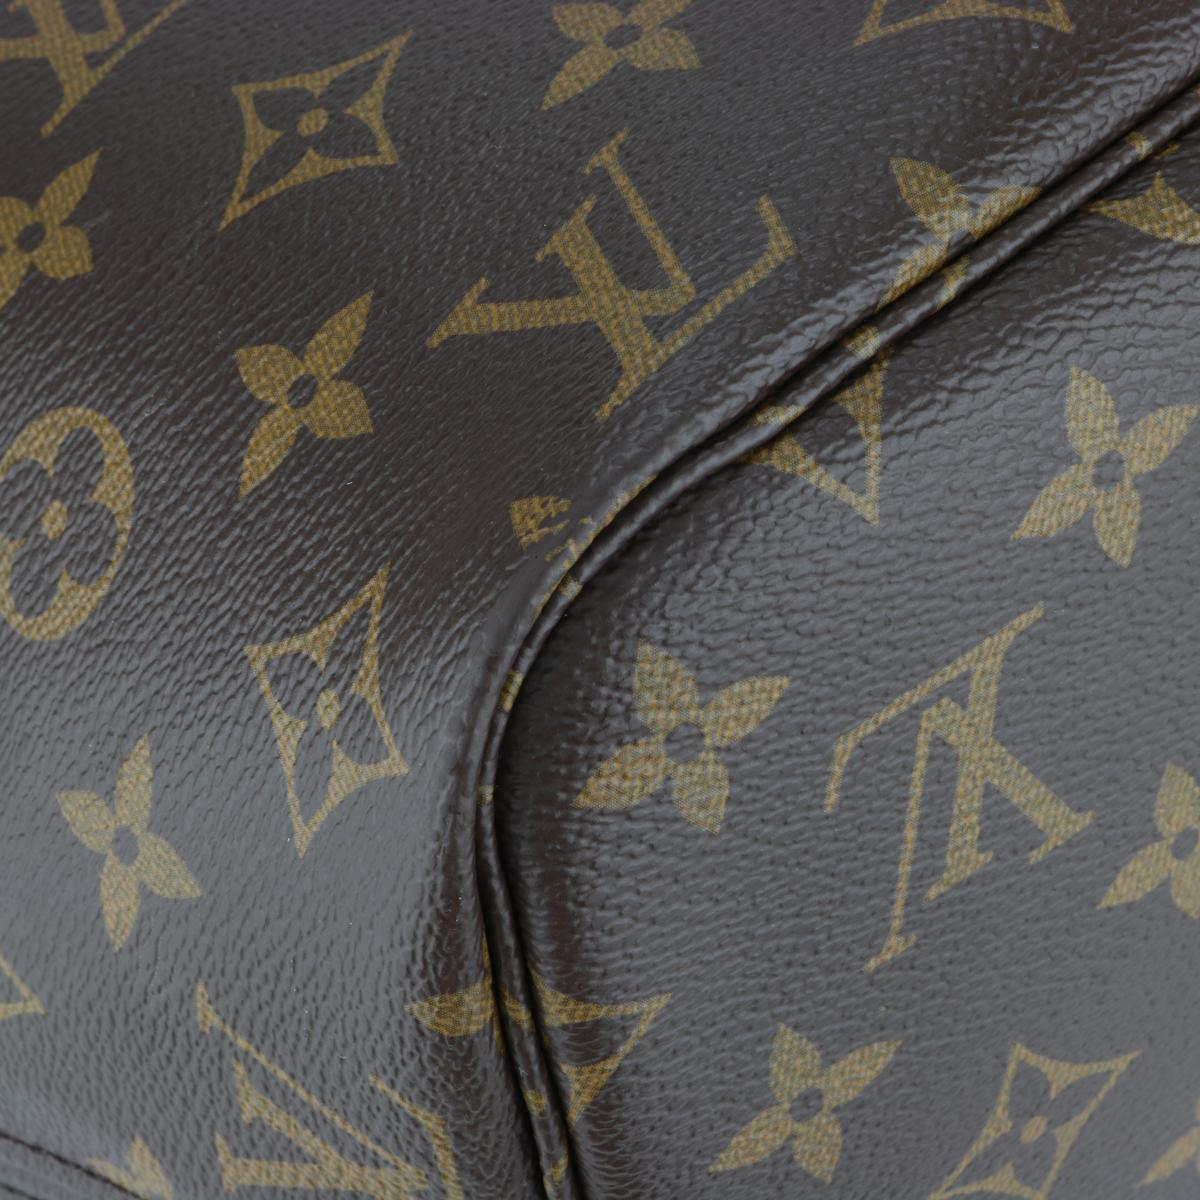 Louis Vuitton Neverfull MM Bag in Monogram with Beige Interior 2016 2